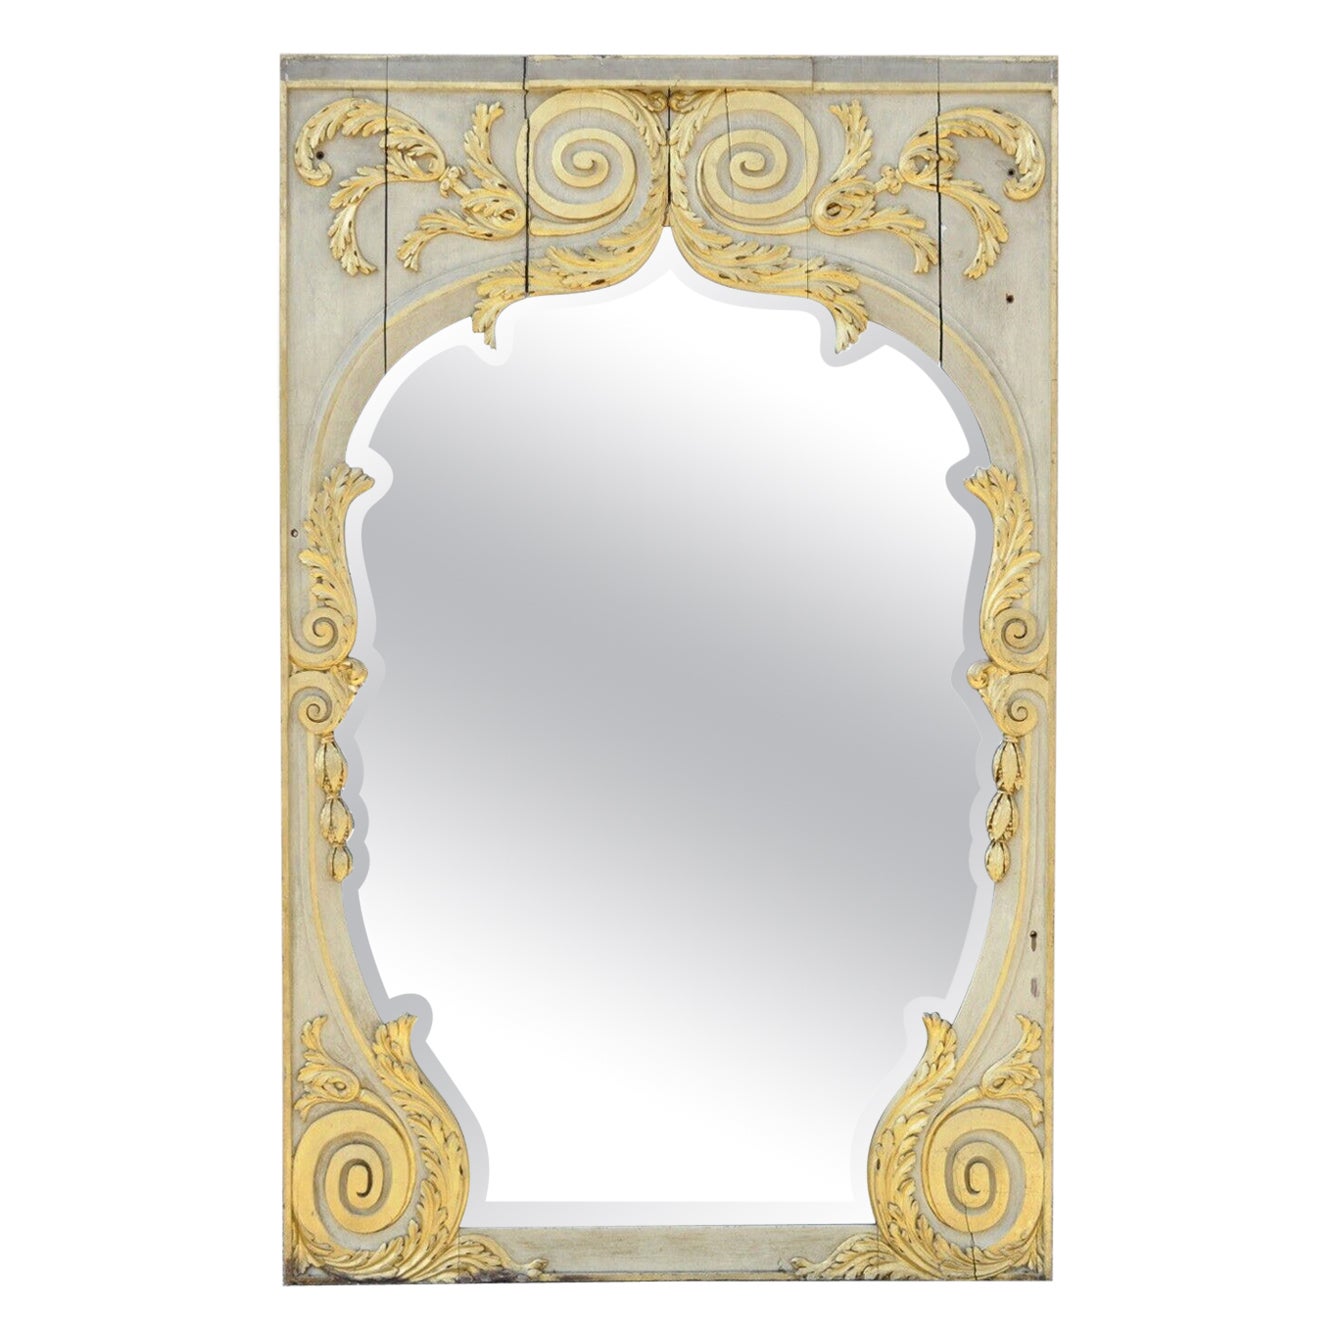 Antique French Rococo Louis XV Style 85" Gold Gilt Cream Painted Trumeau Mirror